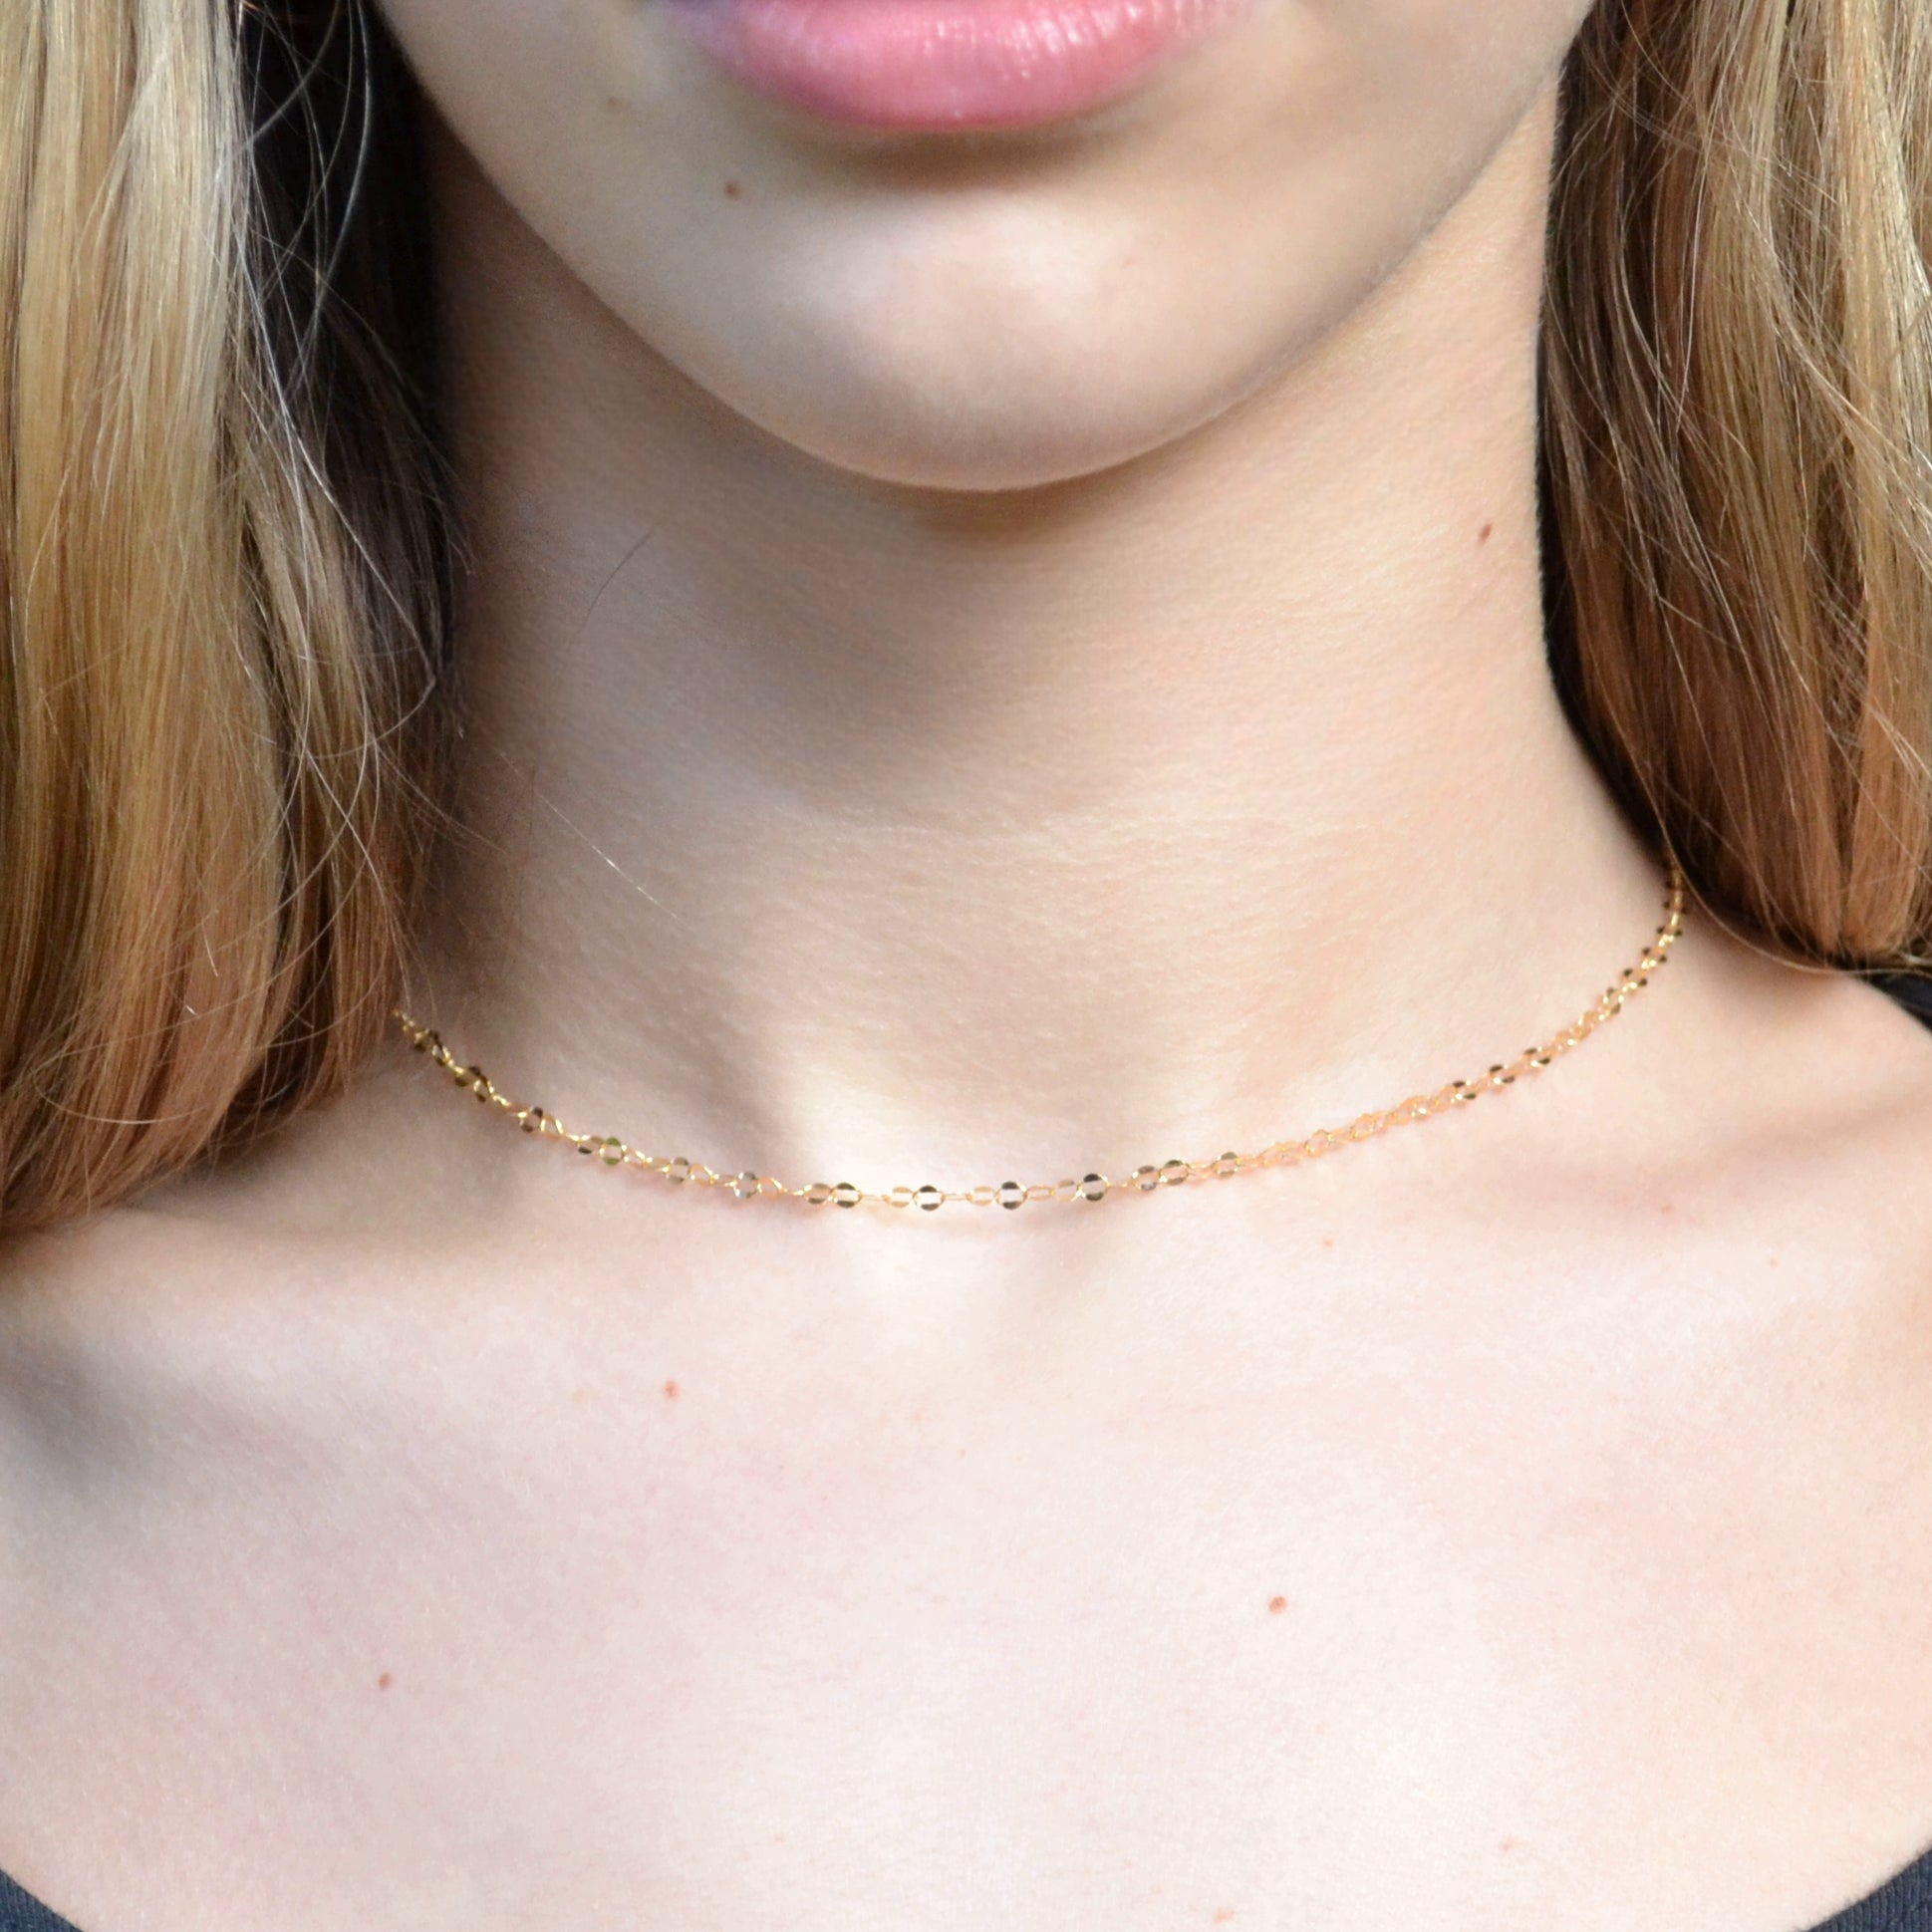 Chain only necklaces and chokers, designed for stacking, layering or wearing alone.  Your perfect base layer jewelry for everyday.